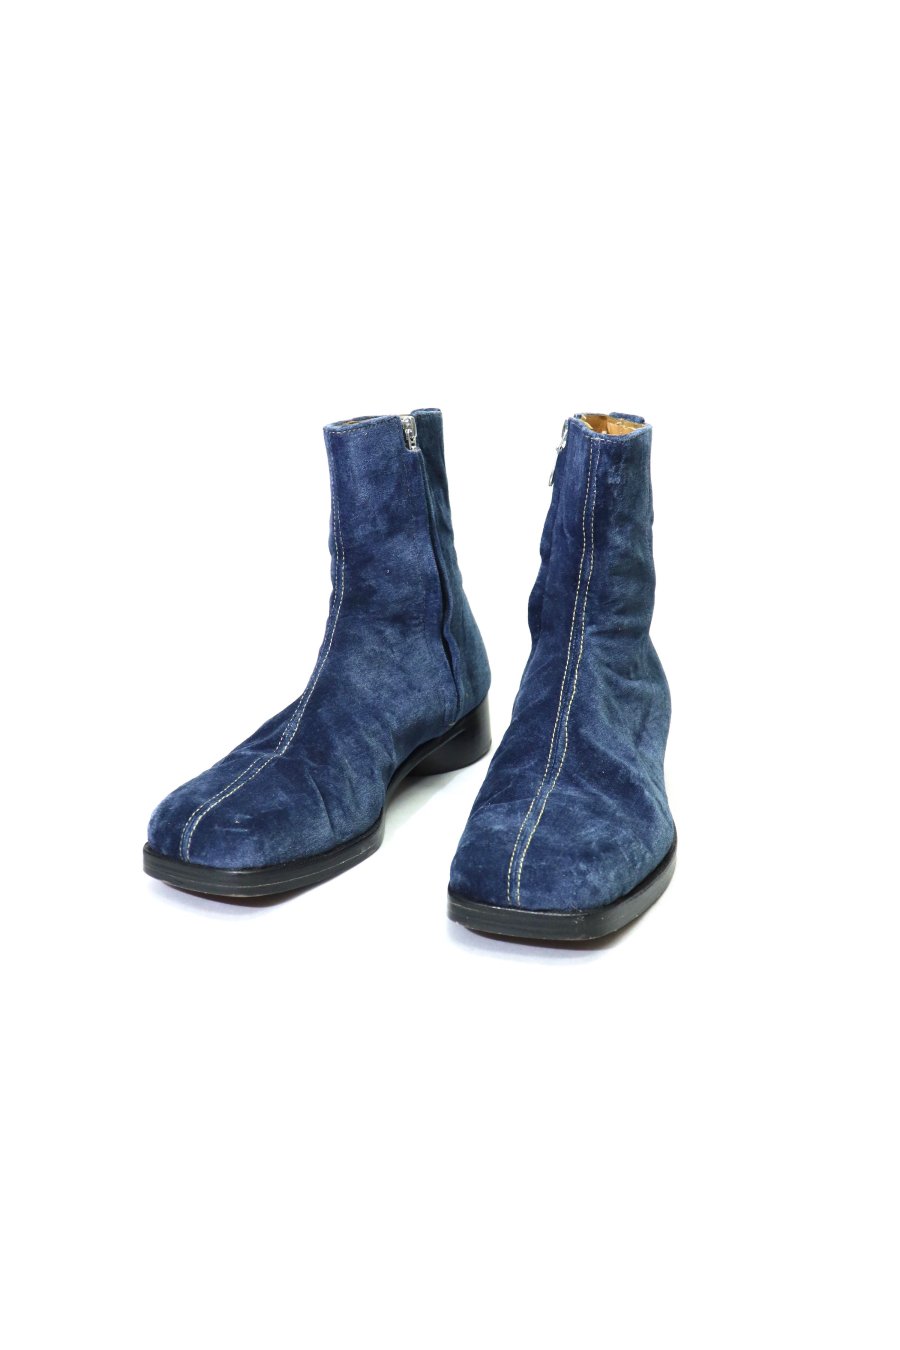 MASU × P.A.A INDIGO VELVET SIDE ZIP BOOTS<img class='new_mark_img2' src='https://img.shop-pro.jp/img/new/icons15.gif' style='border:none;display:inline;margin:0px;padding:0px;width:auto;' />